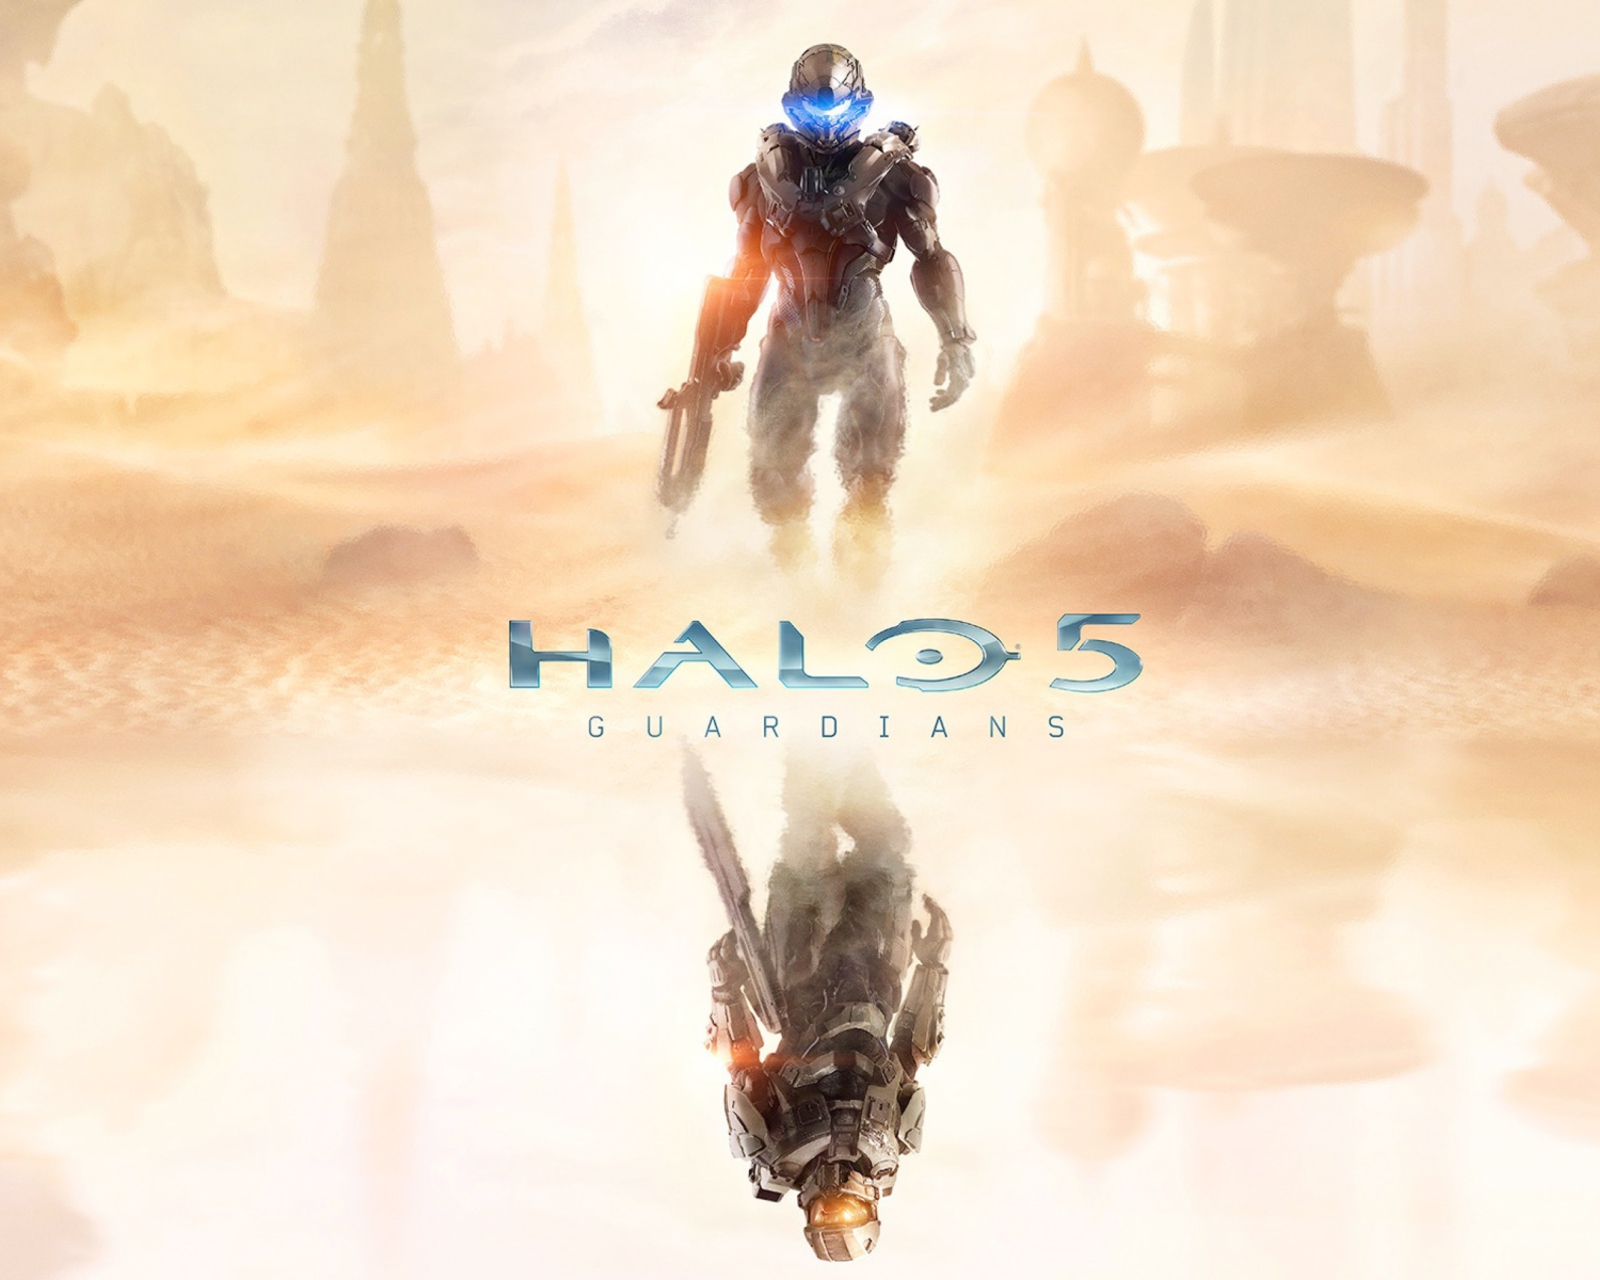 Halo 5 Guardians 2015 Game wallpaper 1600x1280